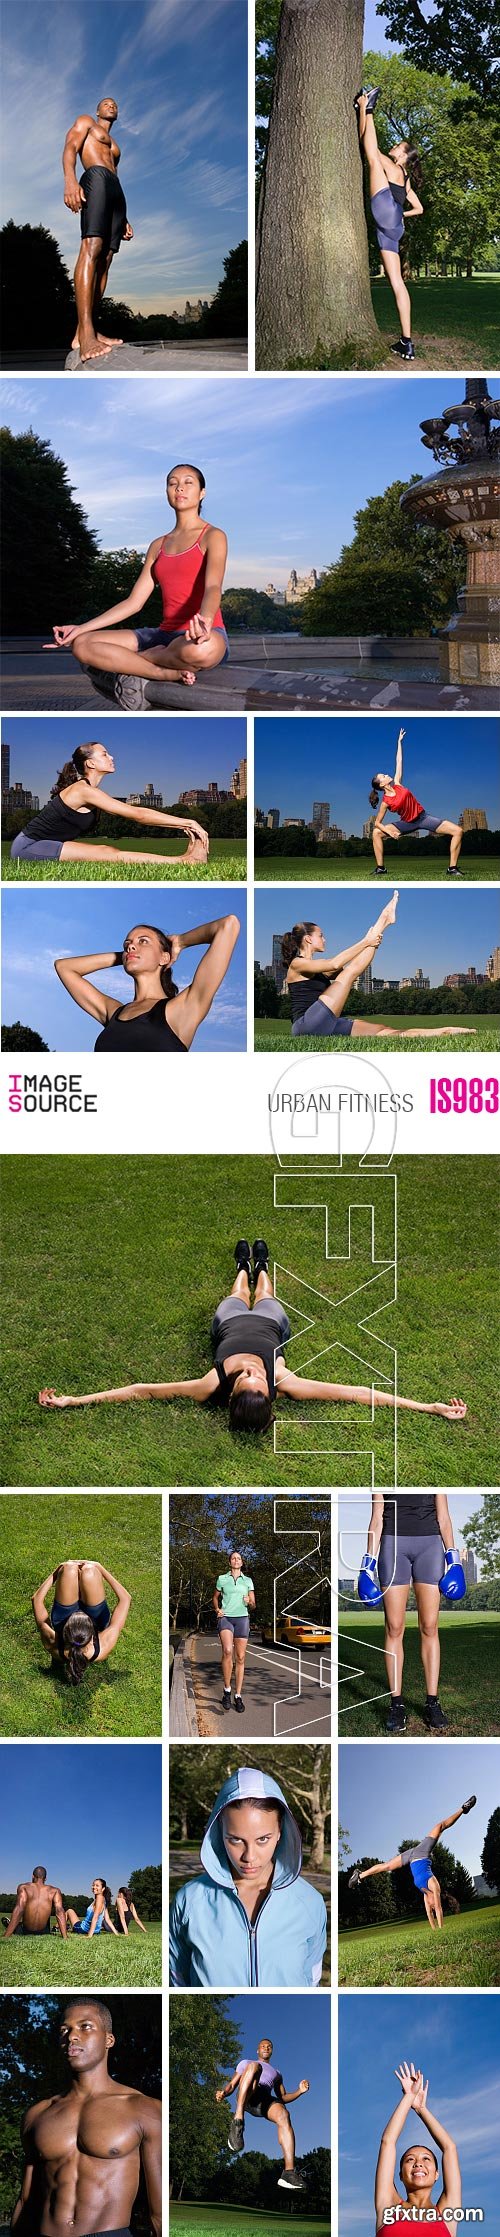 Image Source IS983 Urban Fitness